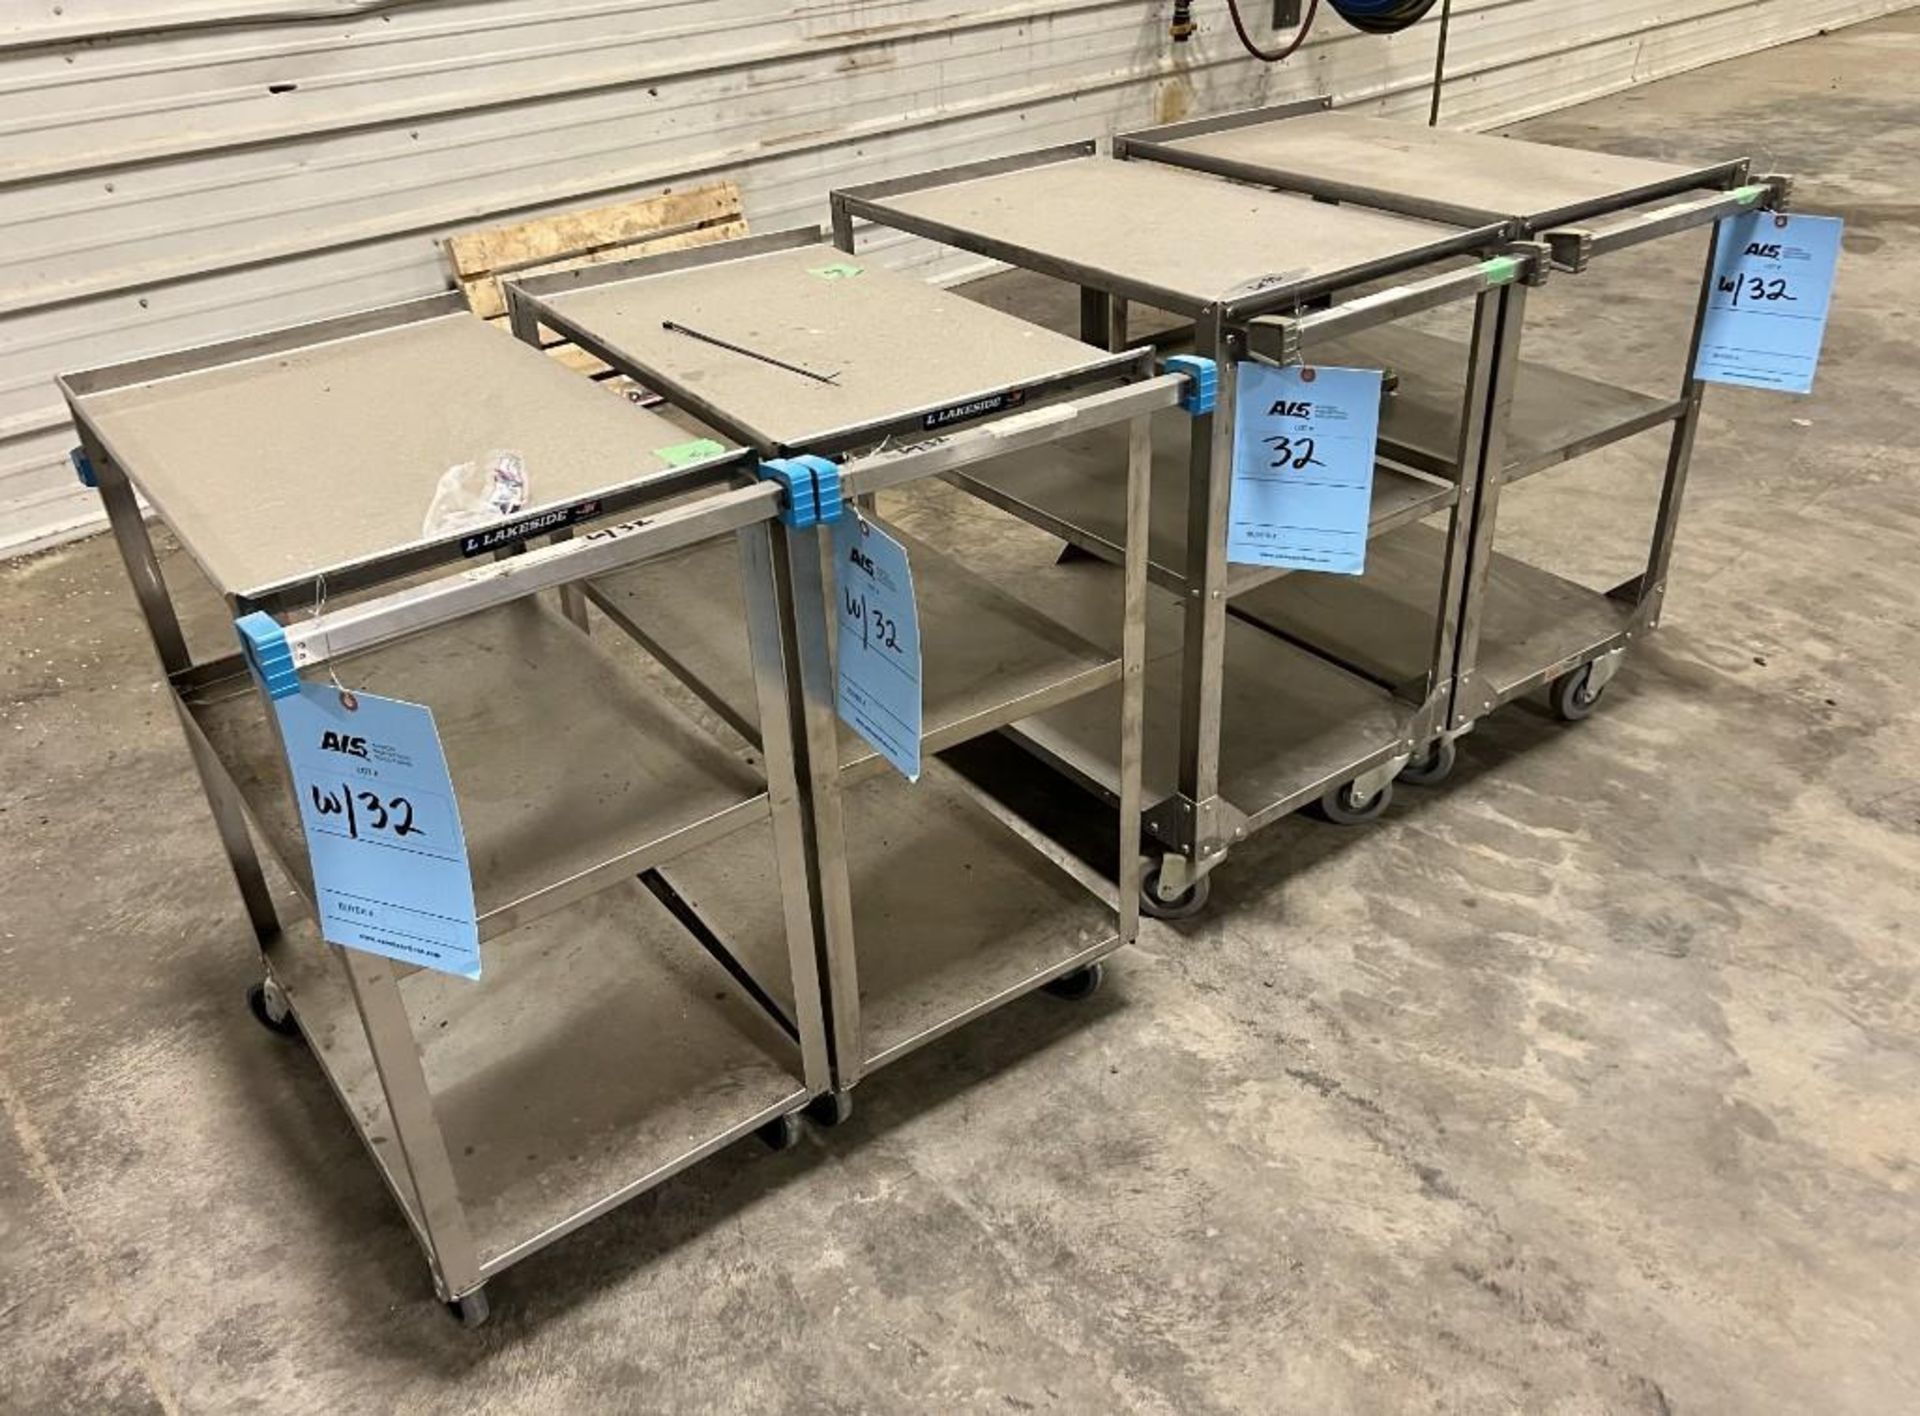 Lot Of (4) Stainless Steel Carts. With (2) Uline, (2) Lakeside.